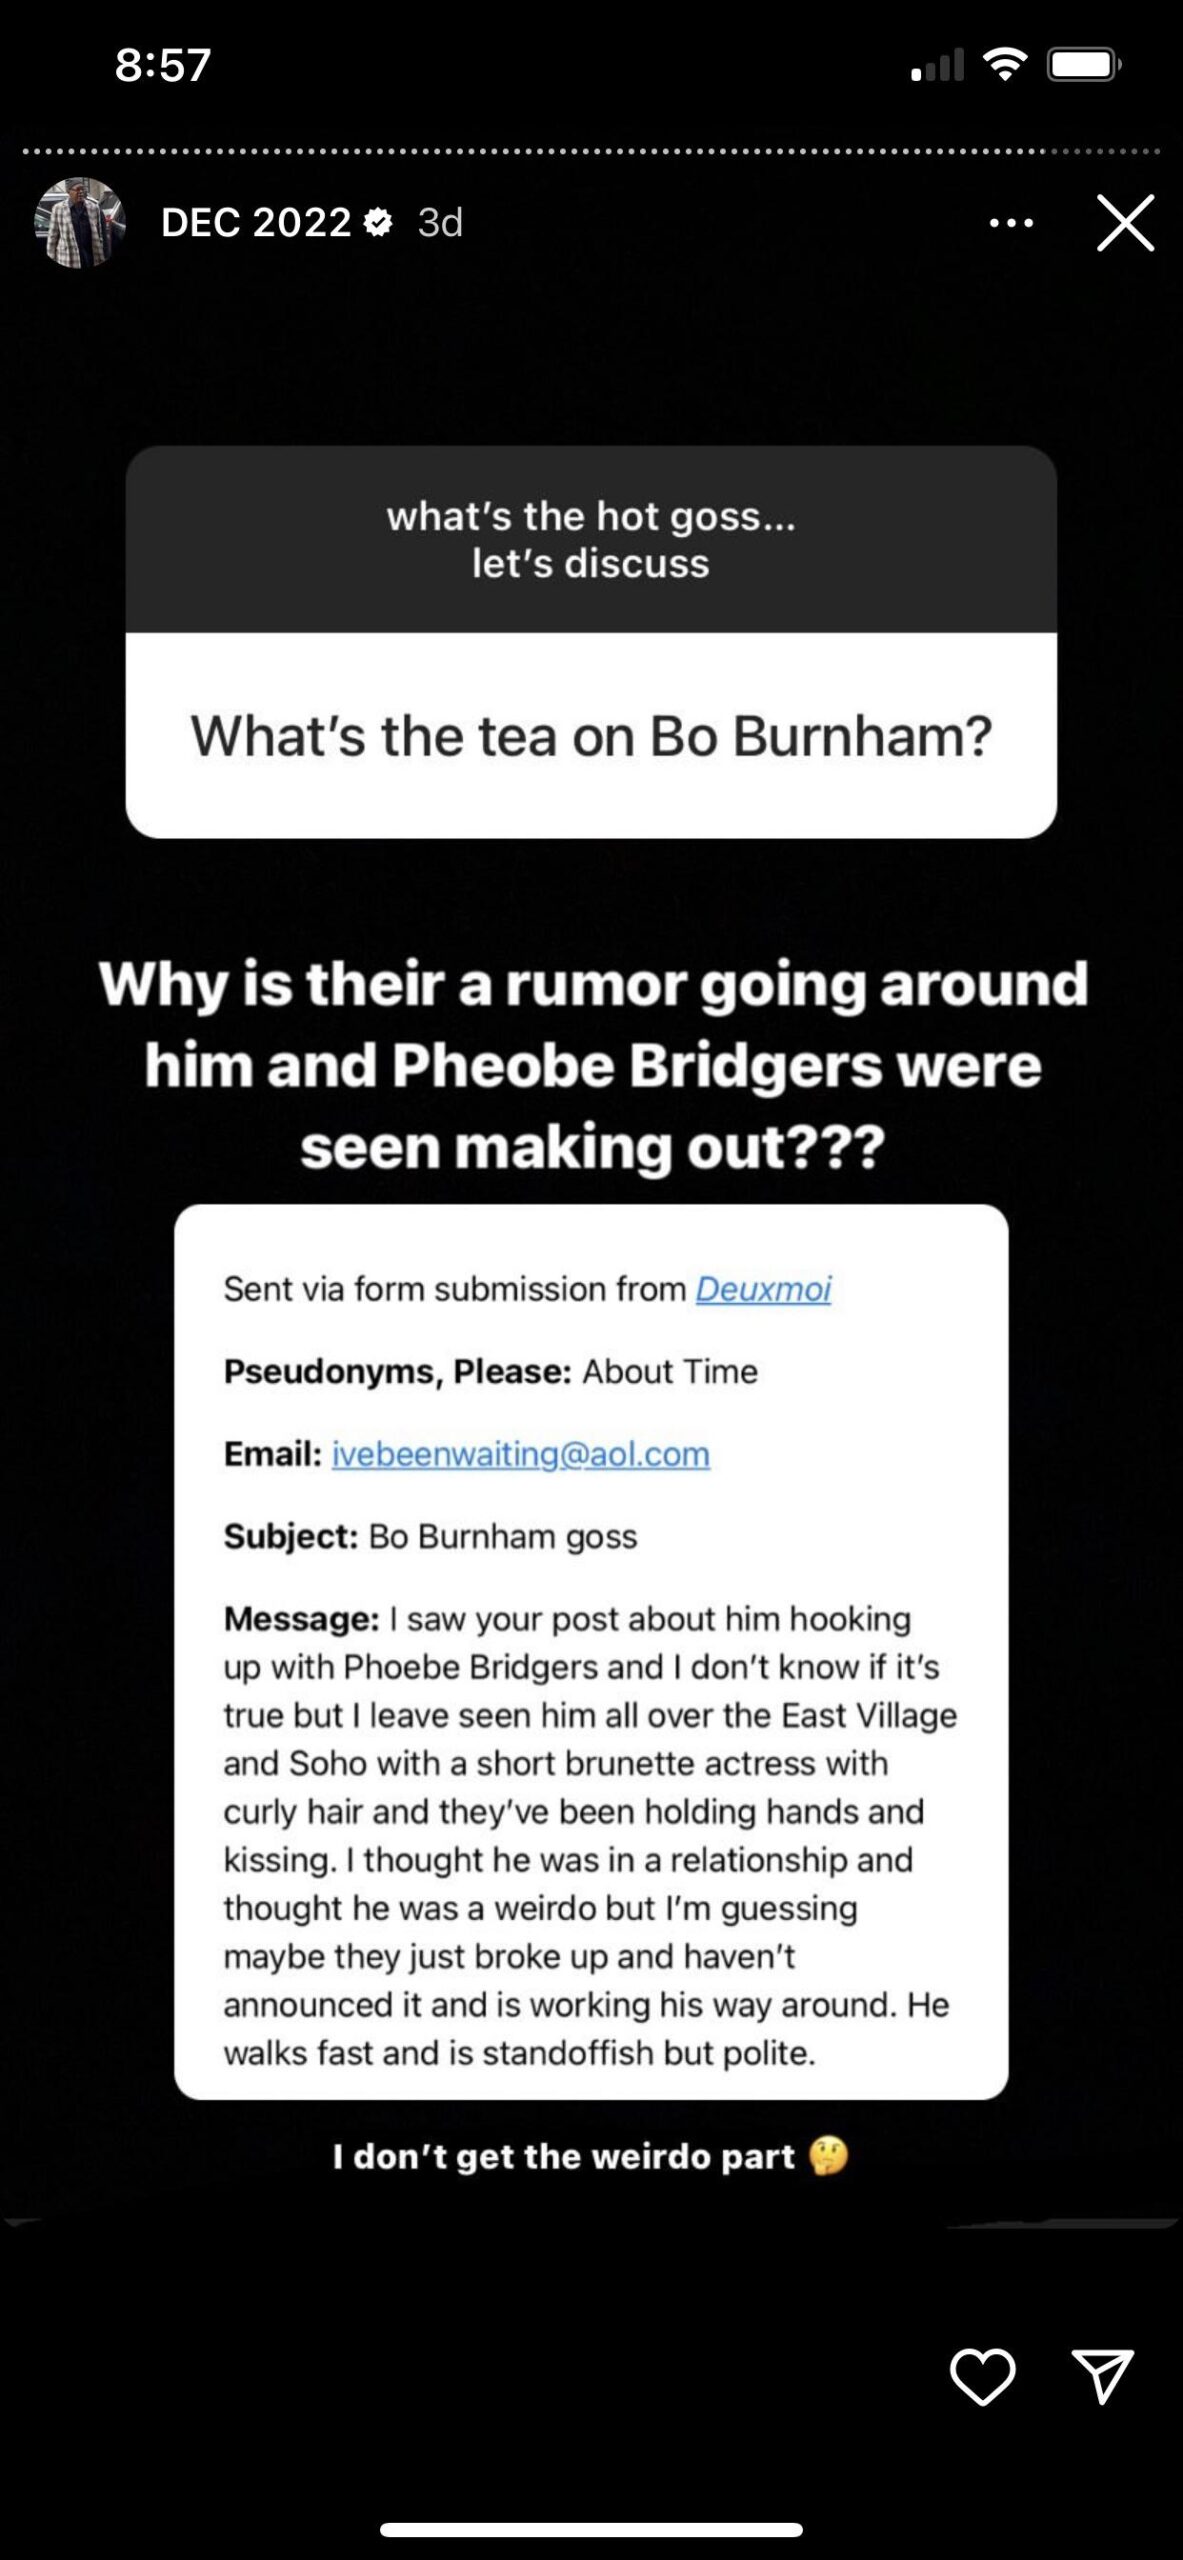 A DeuxMoi tipster claiming Bo Burnham was hooking up with Pheobe Bridgers